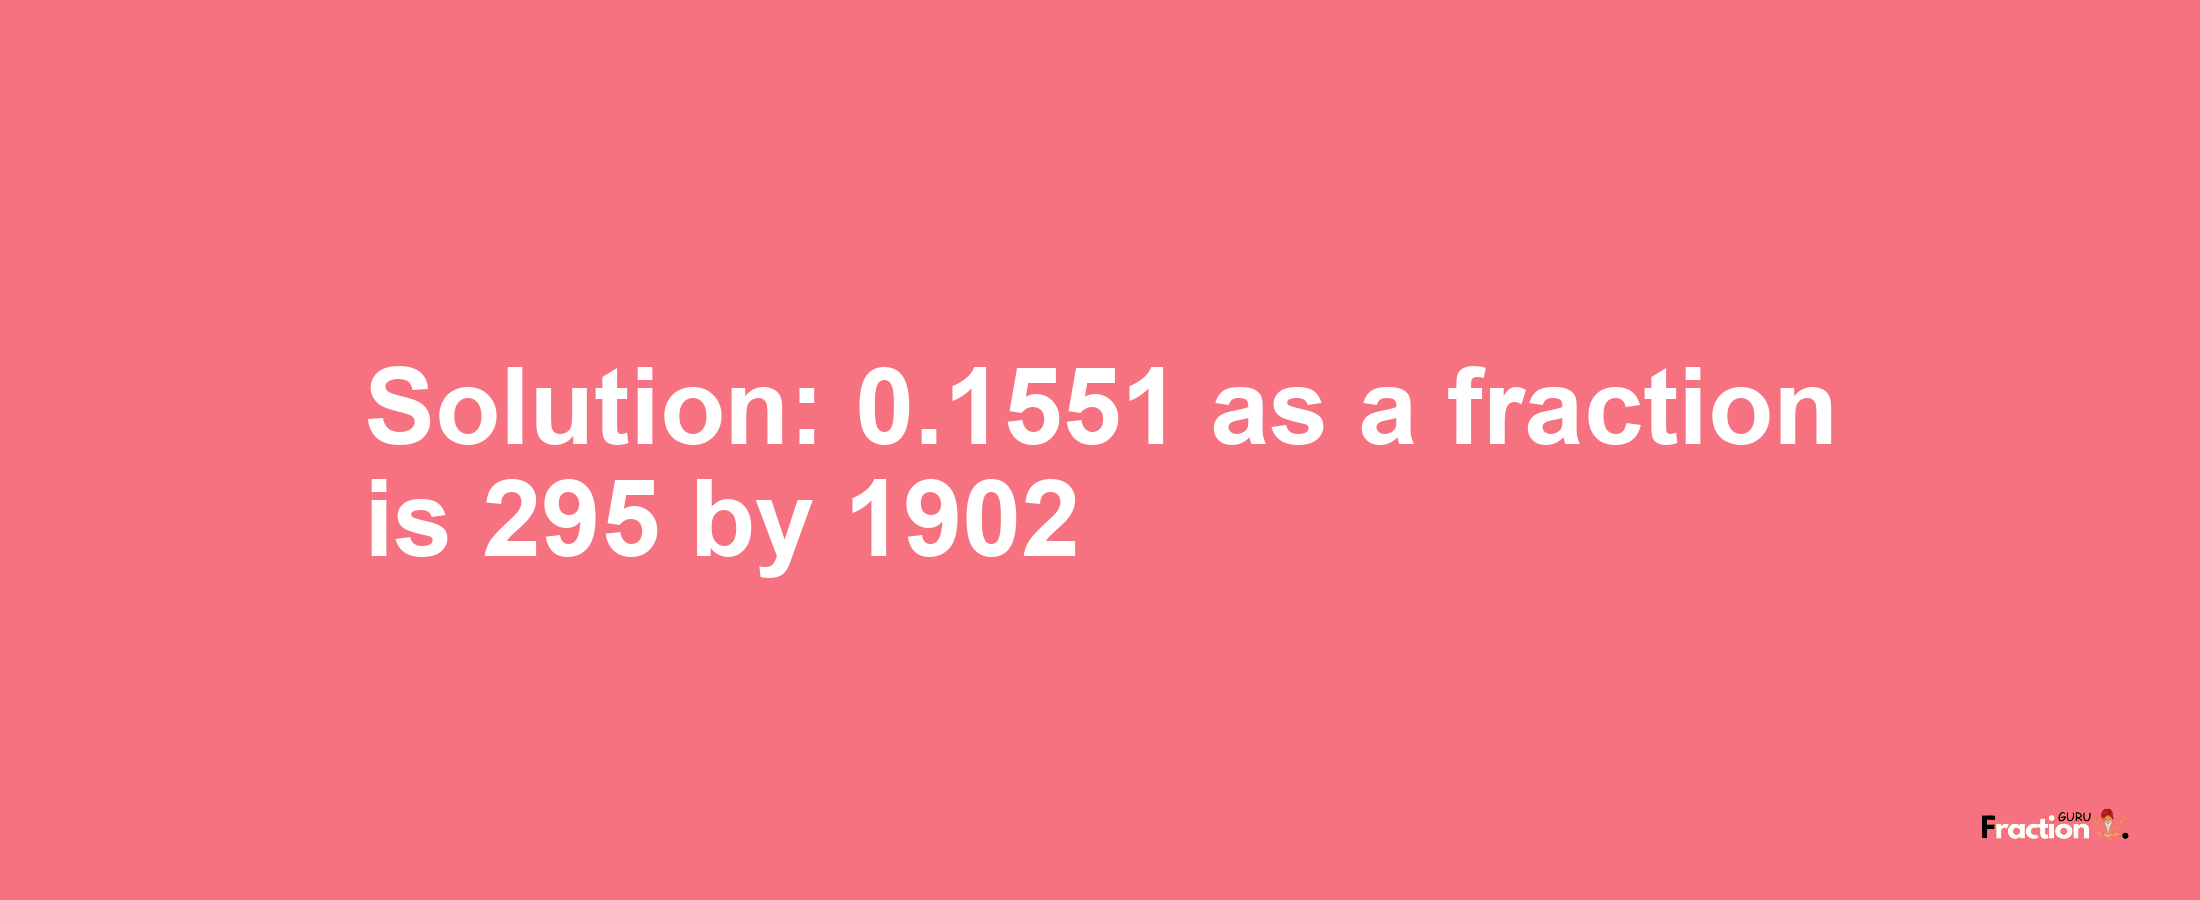 Solution:0.1551 as a fraction is 295/1902